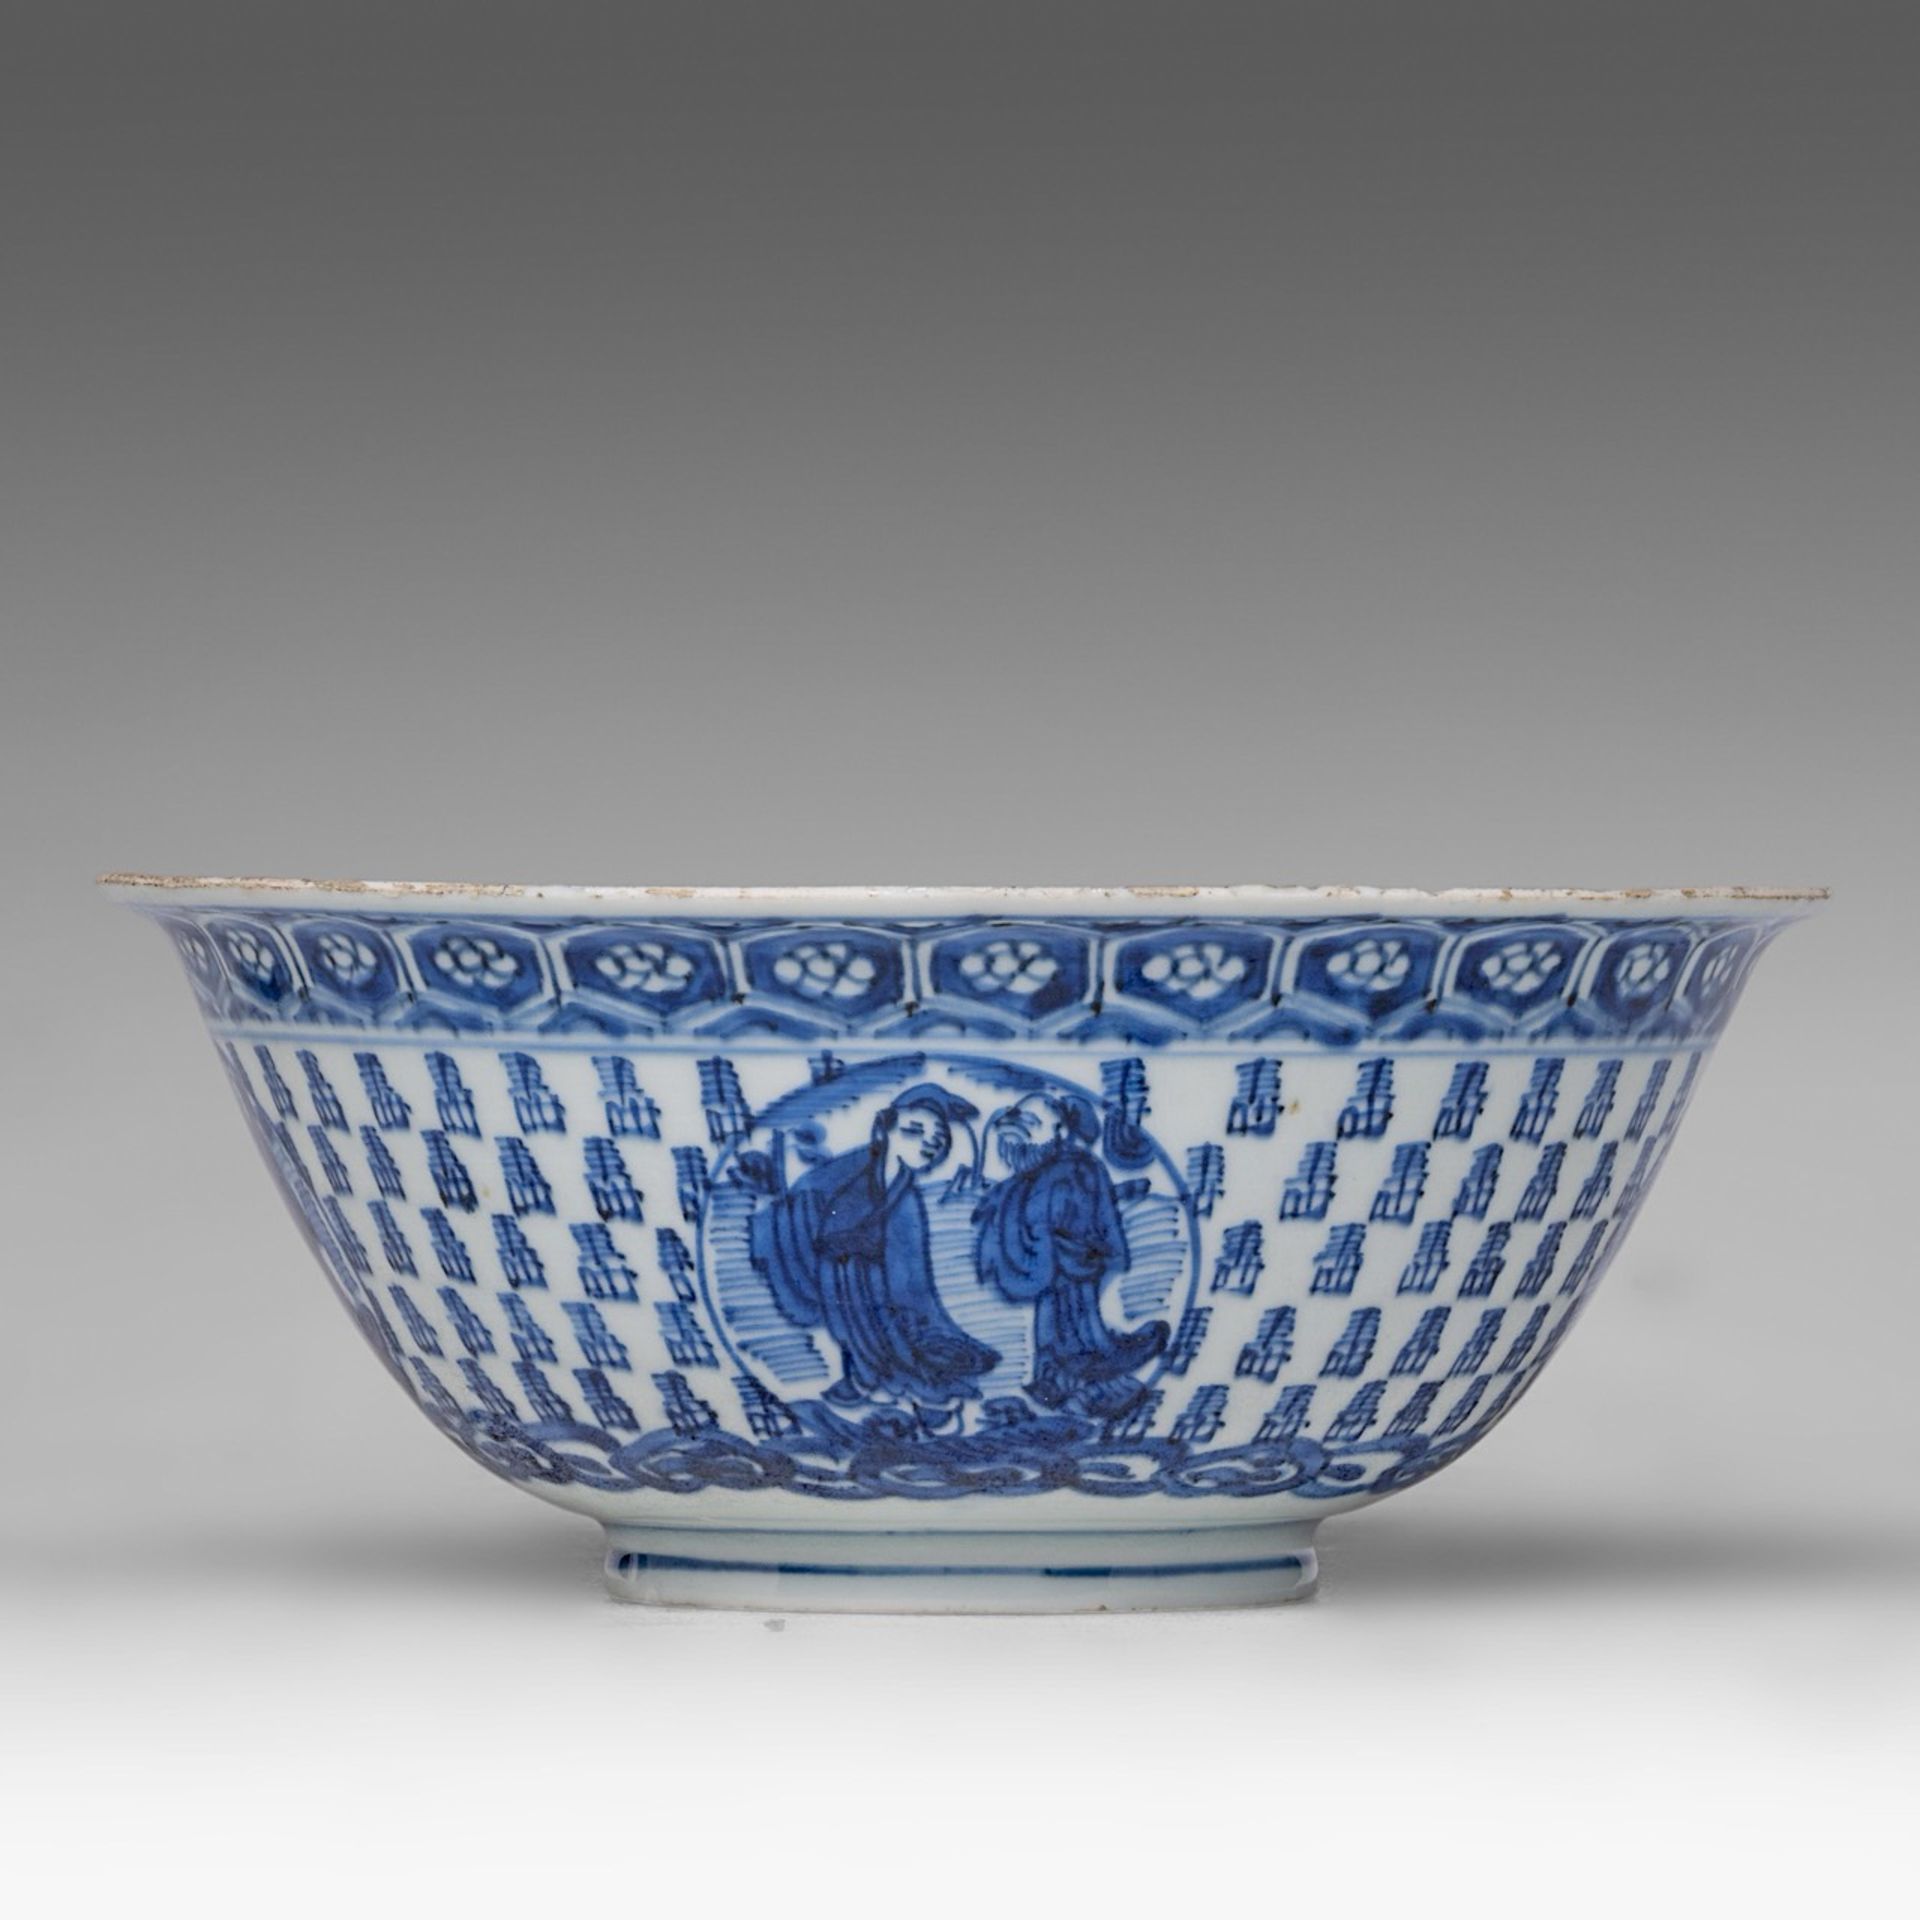 A Chinese blue and white 'Luohan' bowl, Wanli period, Ming dynasty, H 9 - dia 22,5 cm